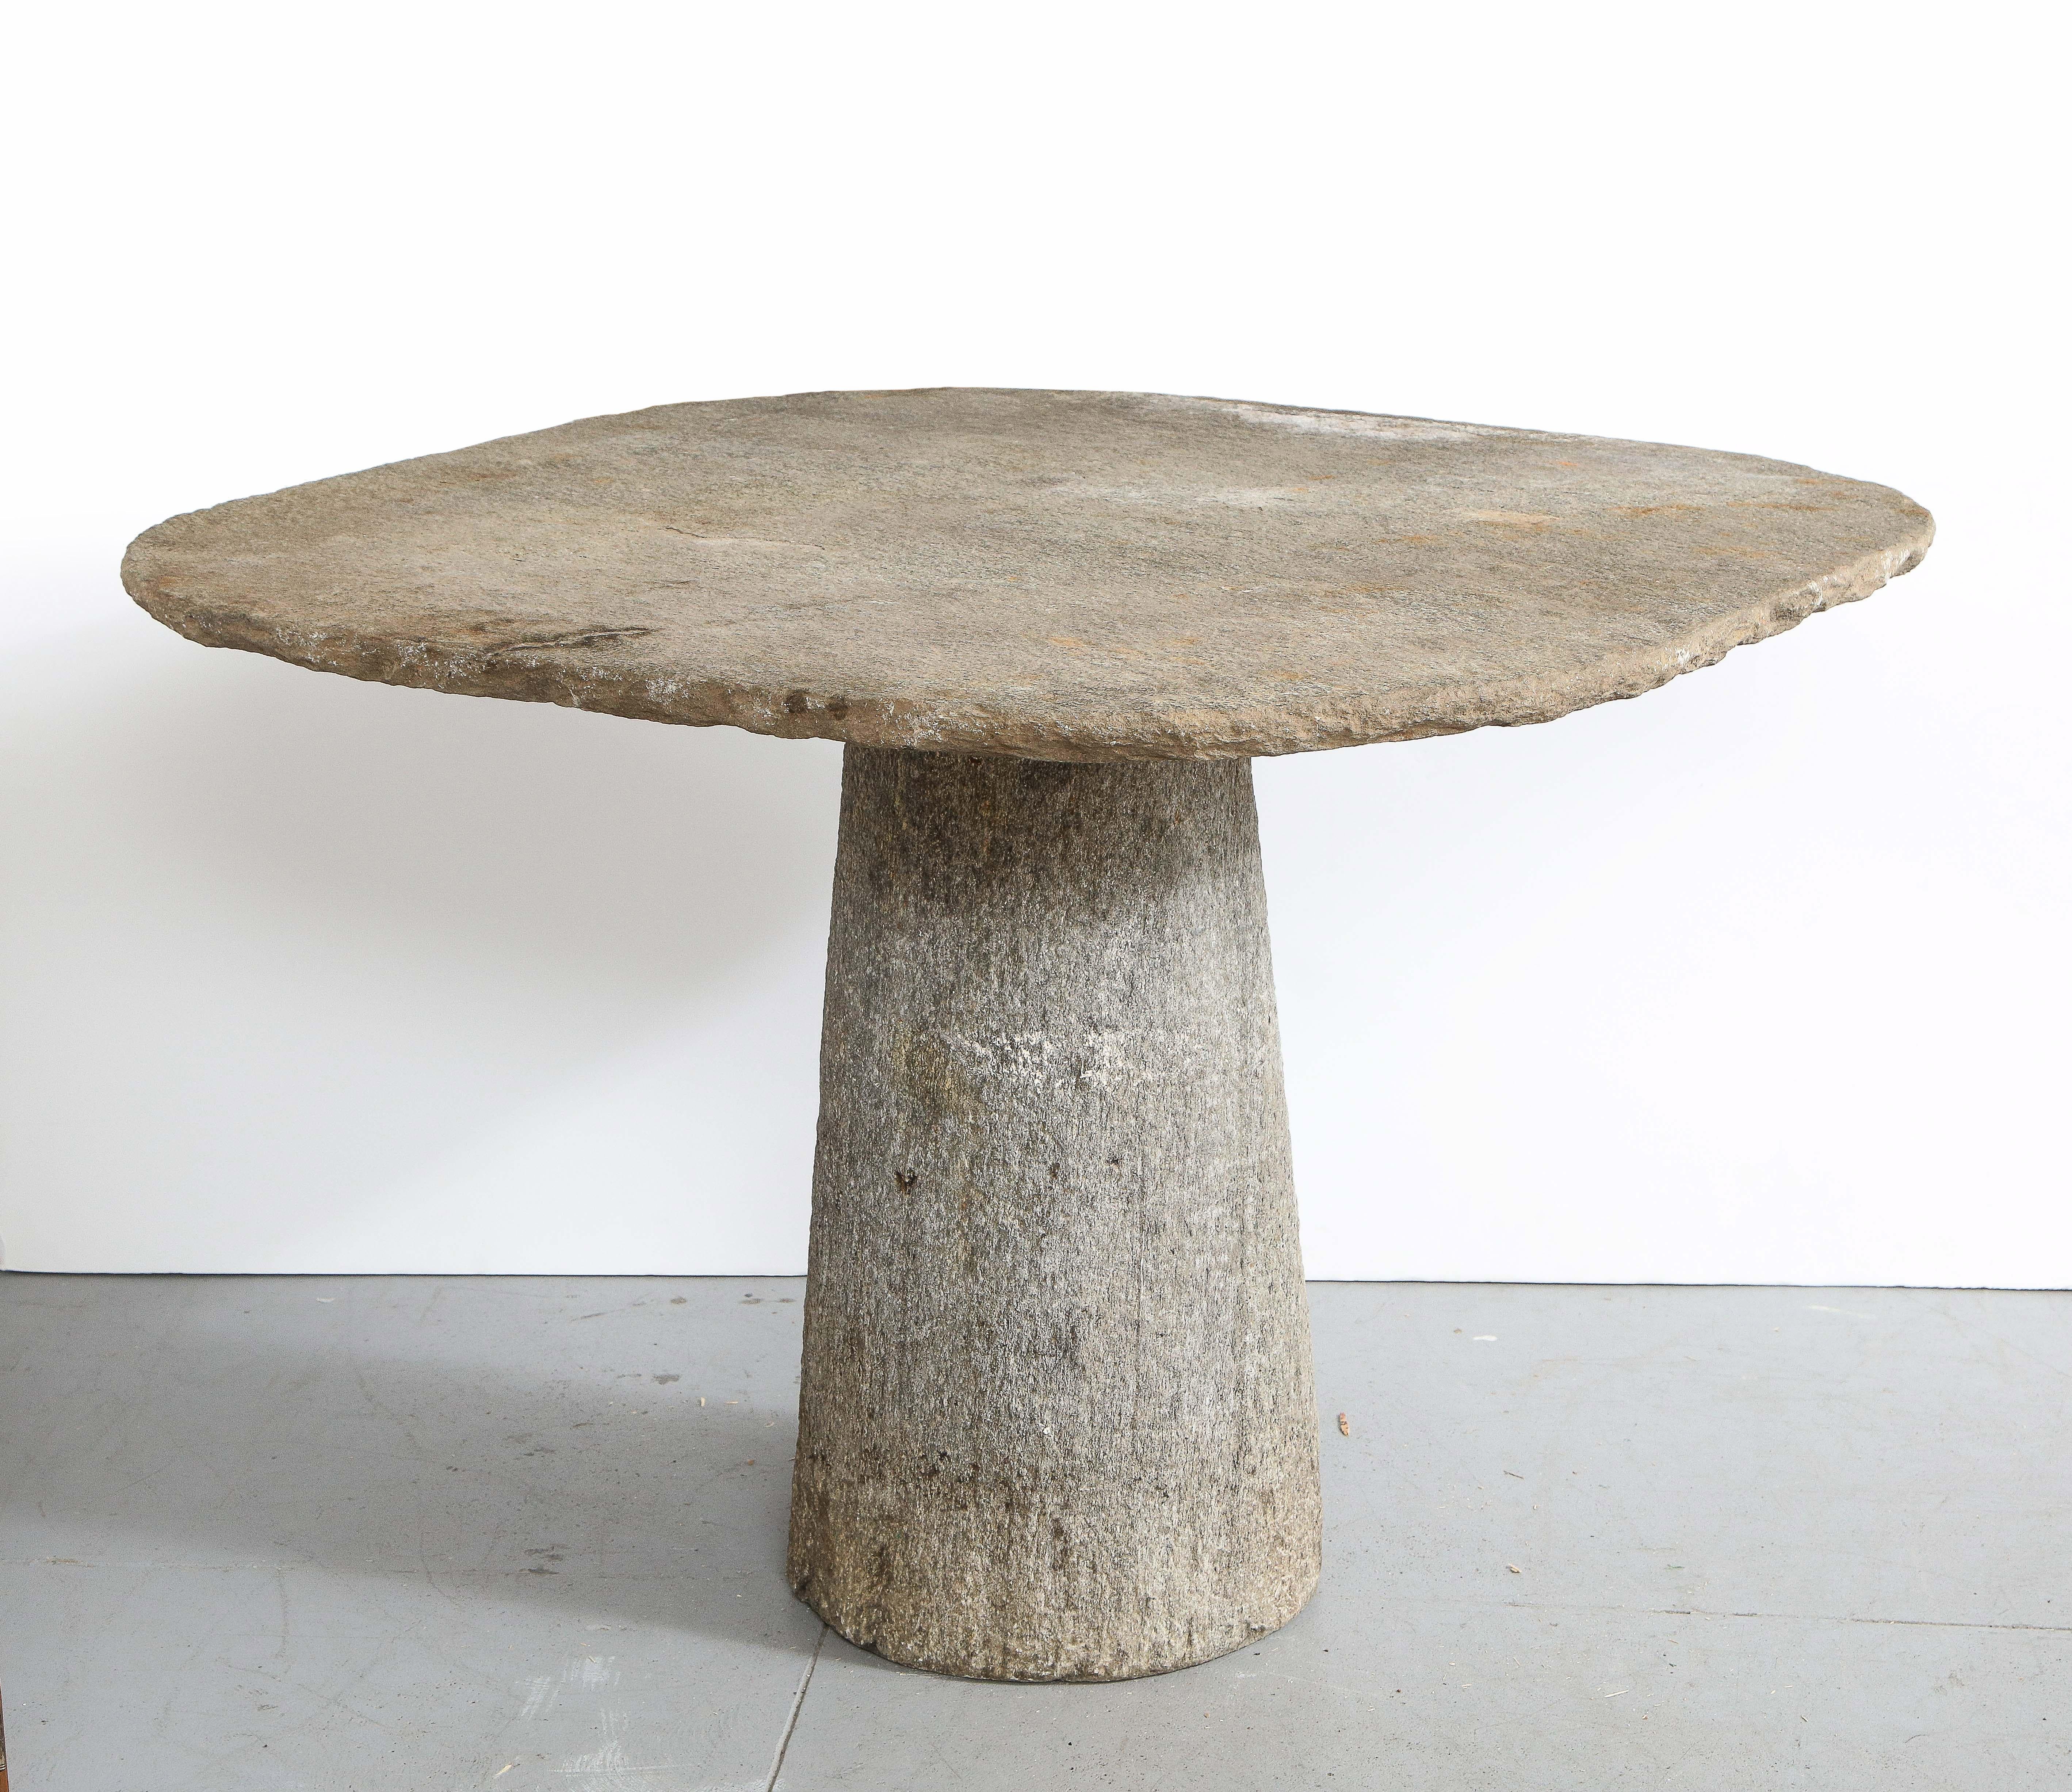 Lucerne hard stone table, Piedmont, Northern Italy (no idea of date - midcentury or earlier certainly)
Stone
Measures: H: 29.5 D: 40 W: 41 in.